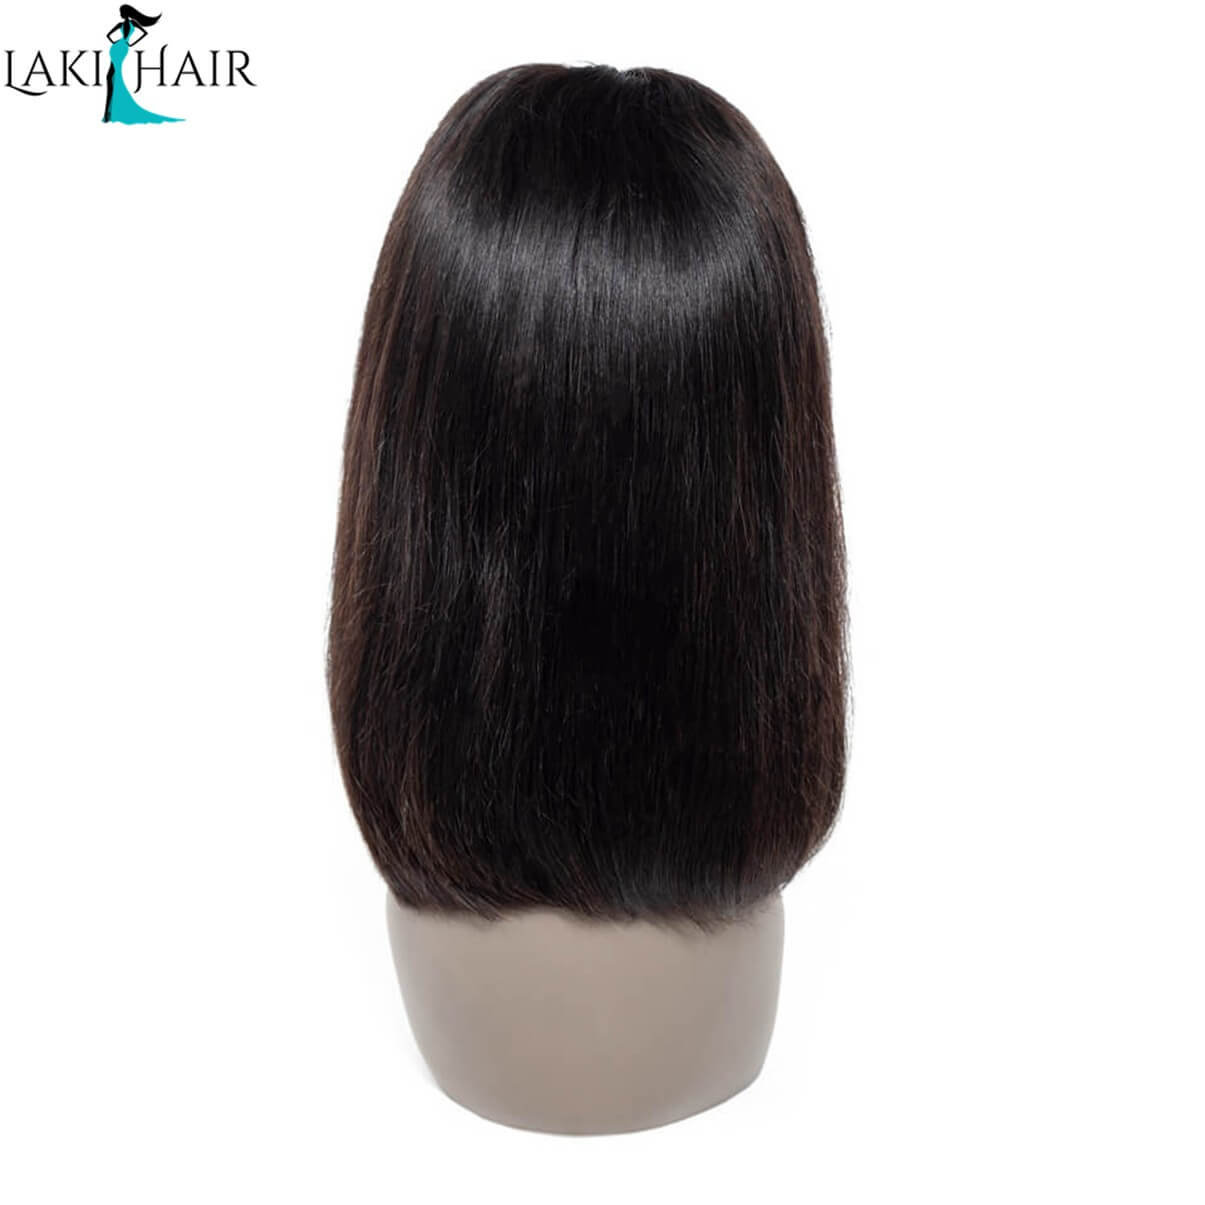 Lakihair Short Lace Front Human Hair Wigs Virgin Brazilian Straight Hair Bob Wigs With Pre Plucked Hairline Bleached Knots 180% Density